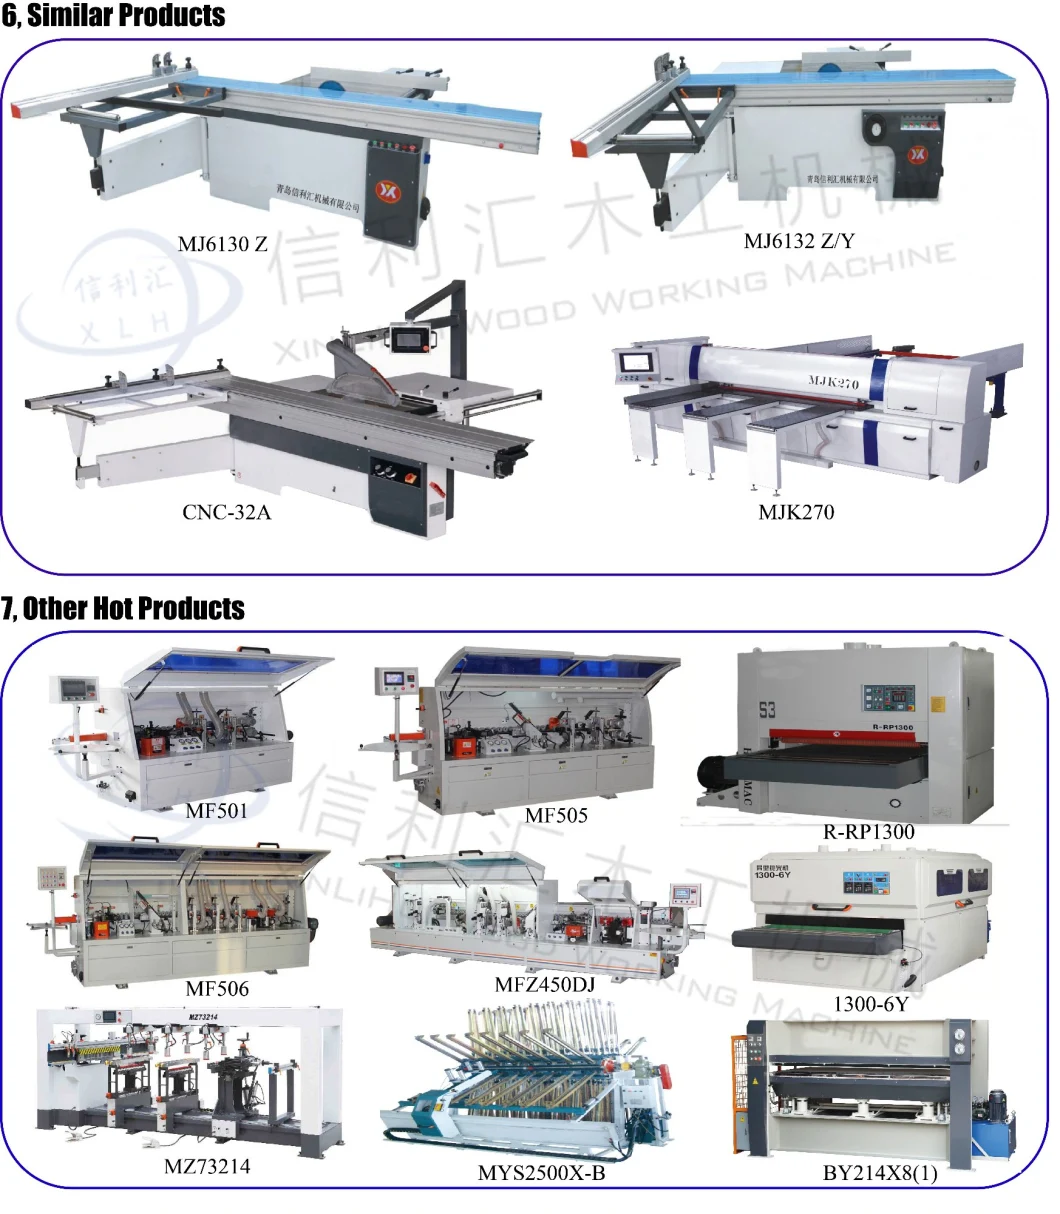 Hot Selling Sawing Machine Ply Chipboard Bench Saw Machine Sliding Table Saw with Scoring Blade Wood Sliding Table Sawmill Circular Saw Machine